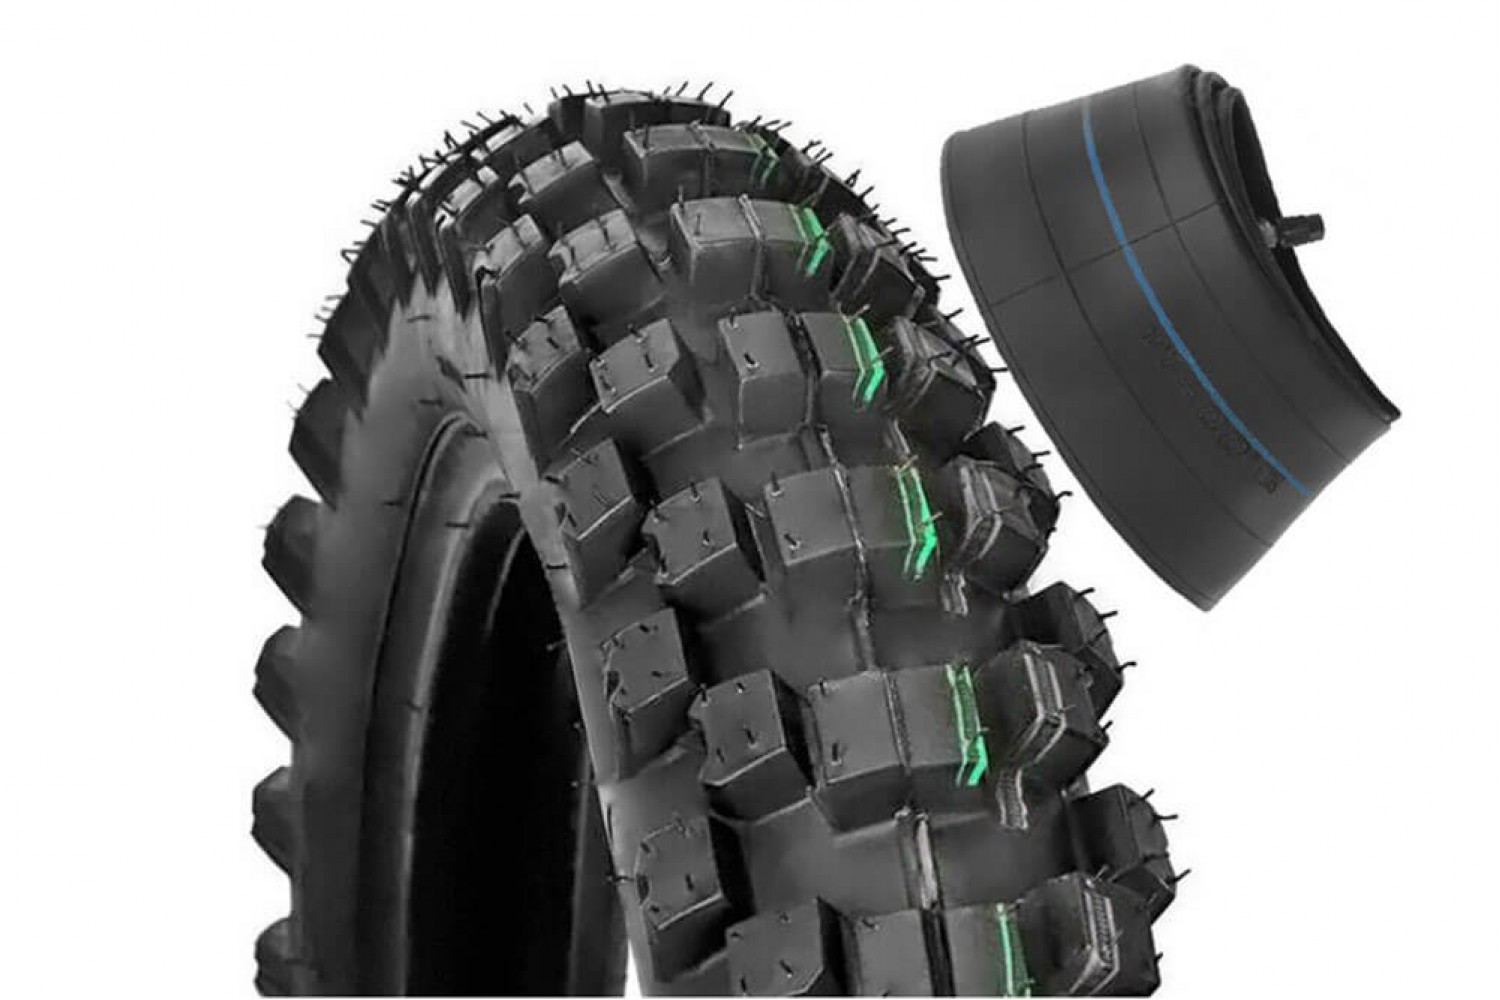 STONEDER 14 inch 90/100-14 Rear Inner Tube For BIGFOOT Pit Dirt Bike 3.0-14 80/100-14 Chinese 125cc 140cc 150cc 160cc Such As Chinese Made CRF50 XR50 SSR YCF IMR Atomik Thumpstar BSE Apollo Kayo Stomp 